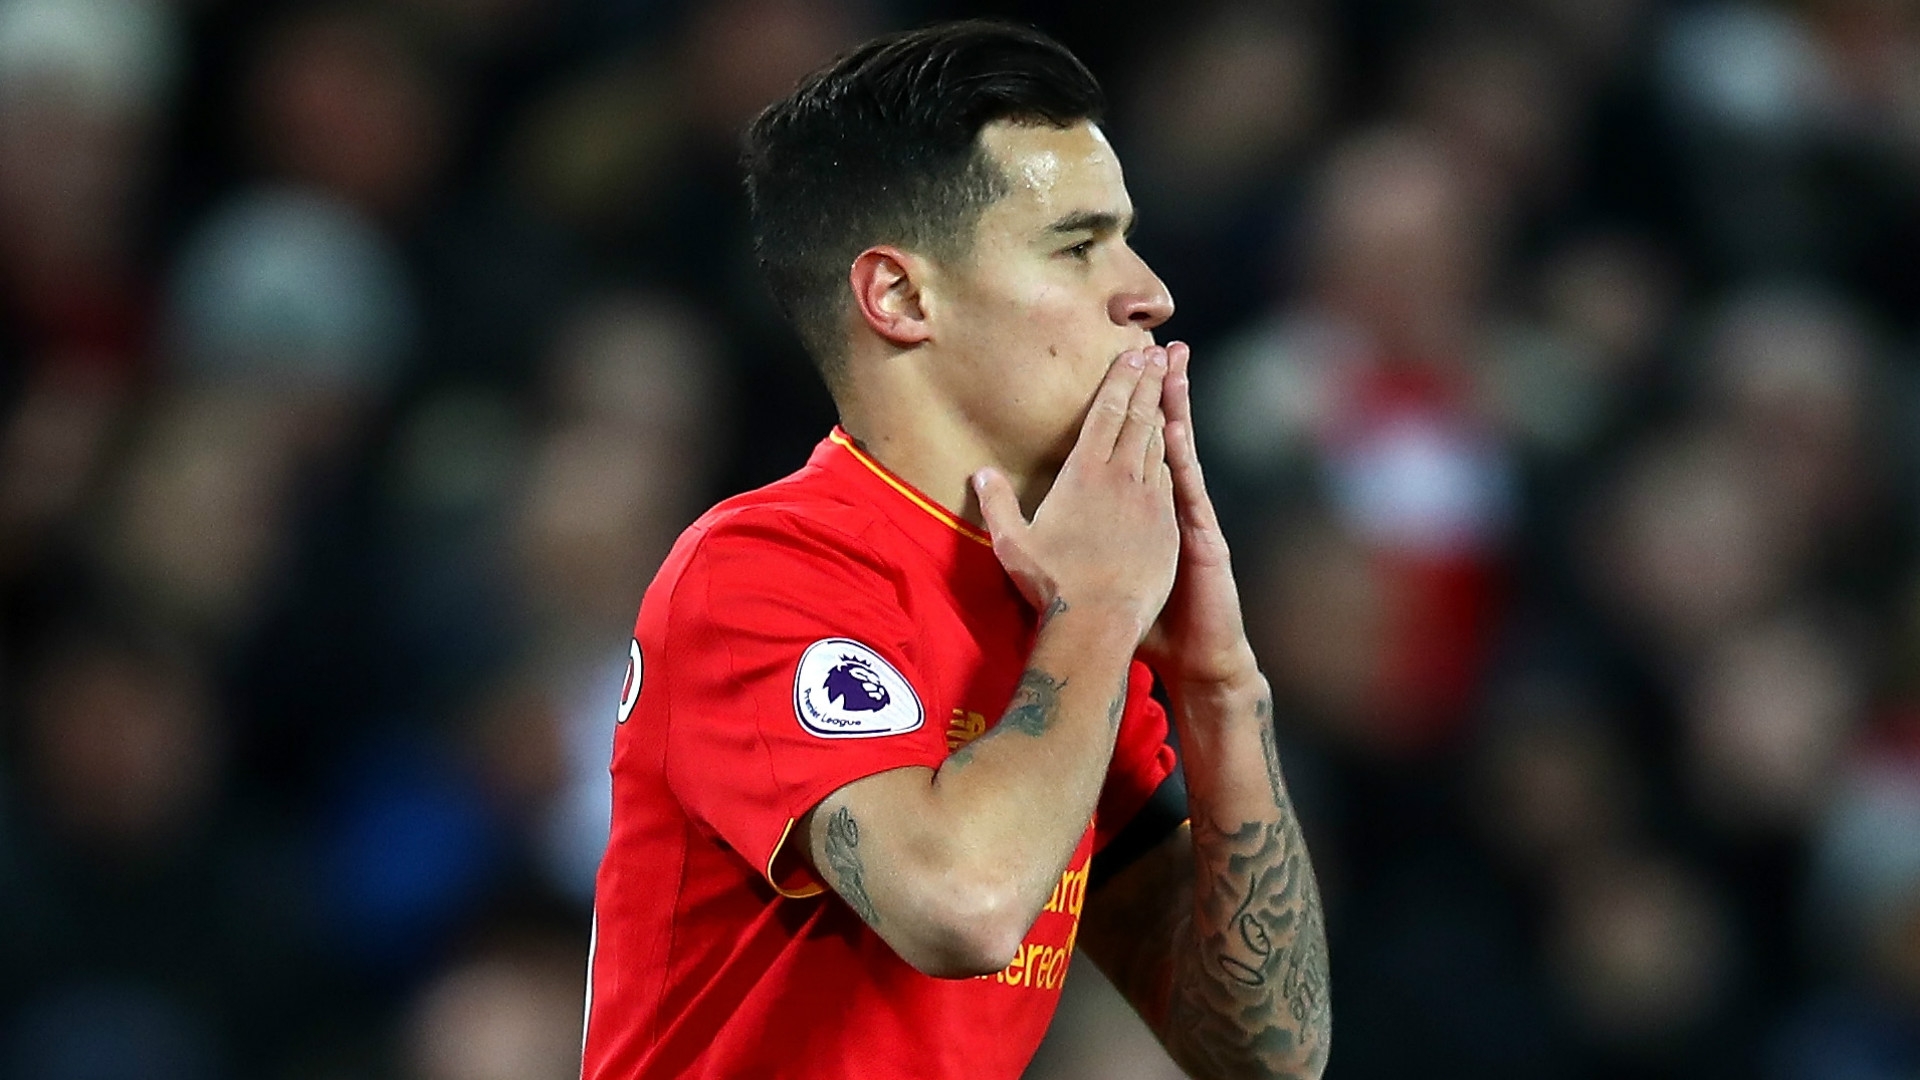 Liverpool spent 8 million pounds on Coutinho and could assure a good profit if they are to sell the player